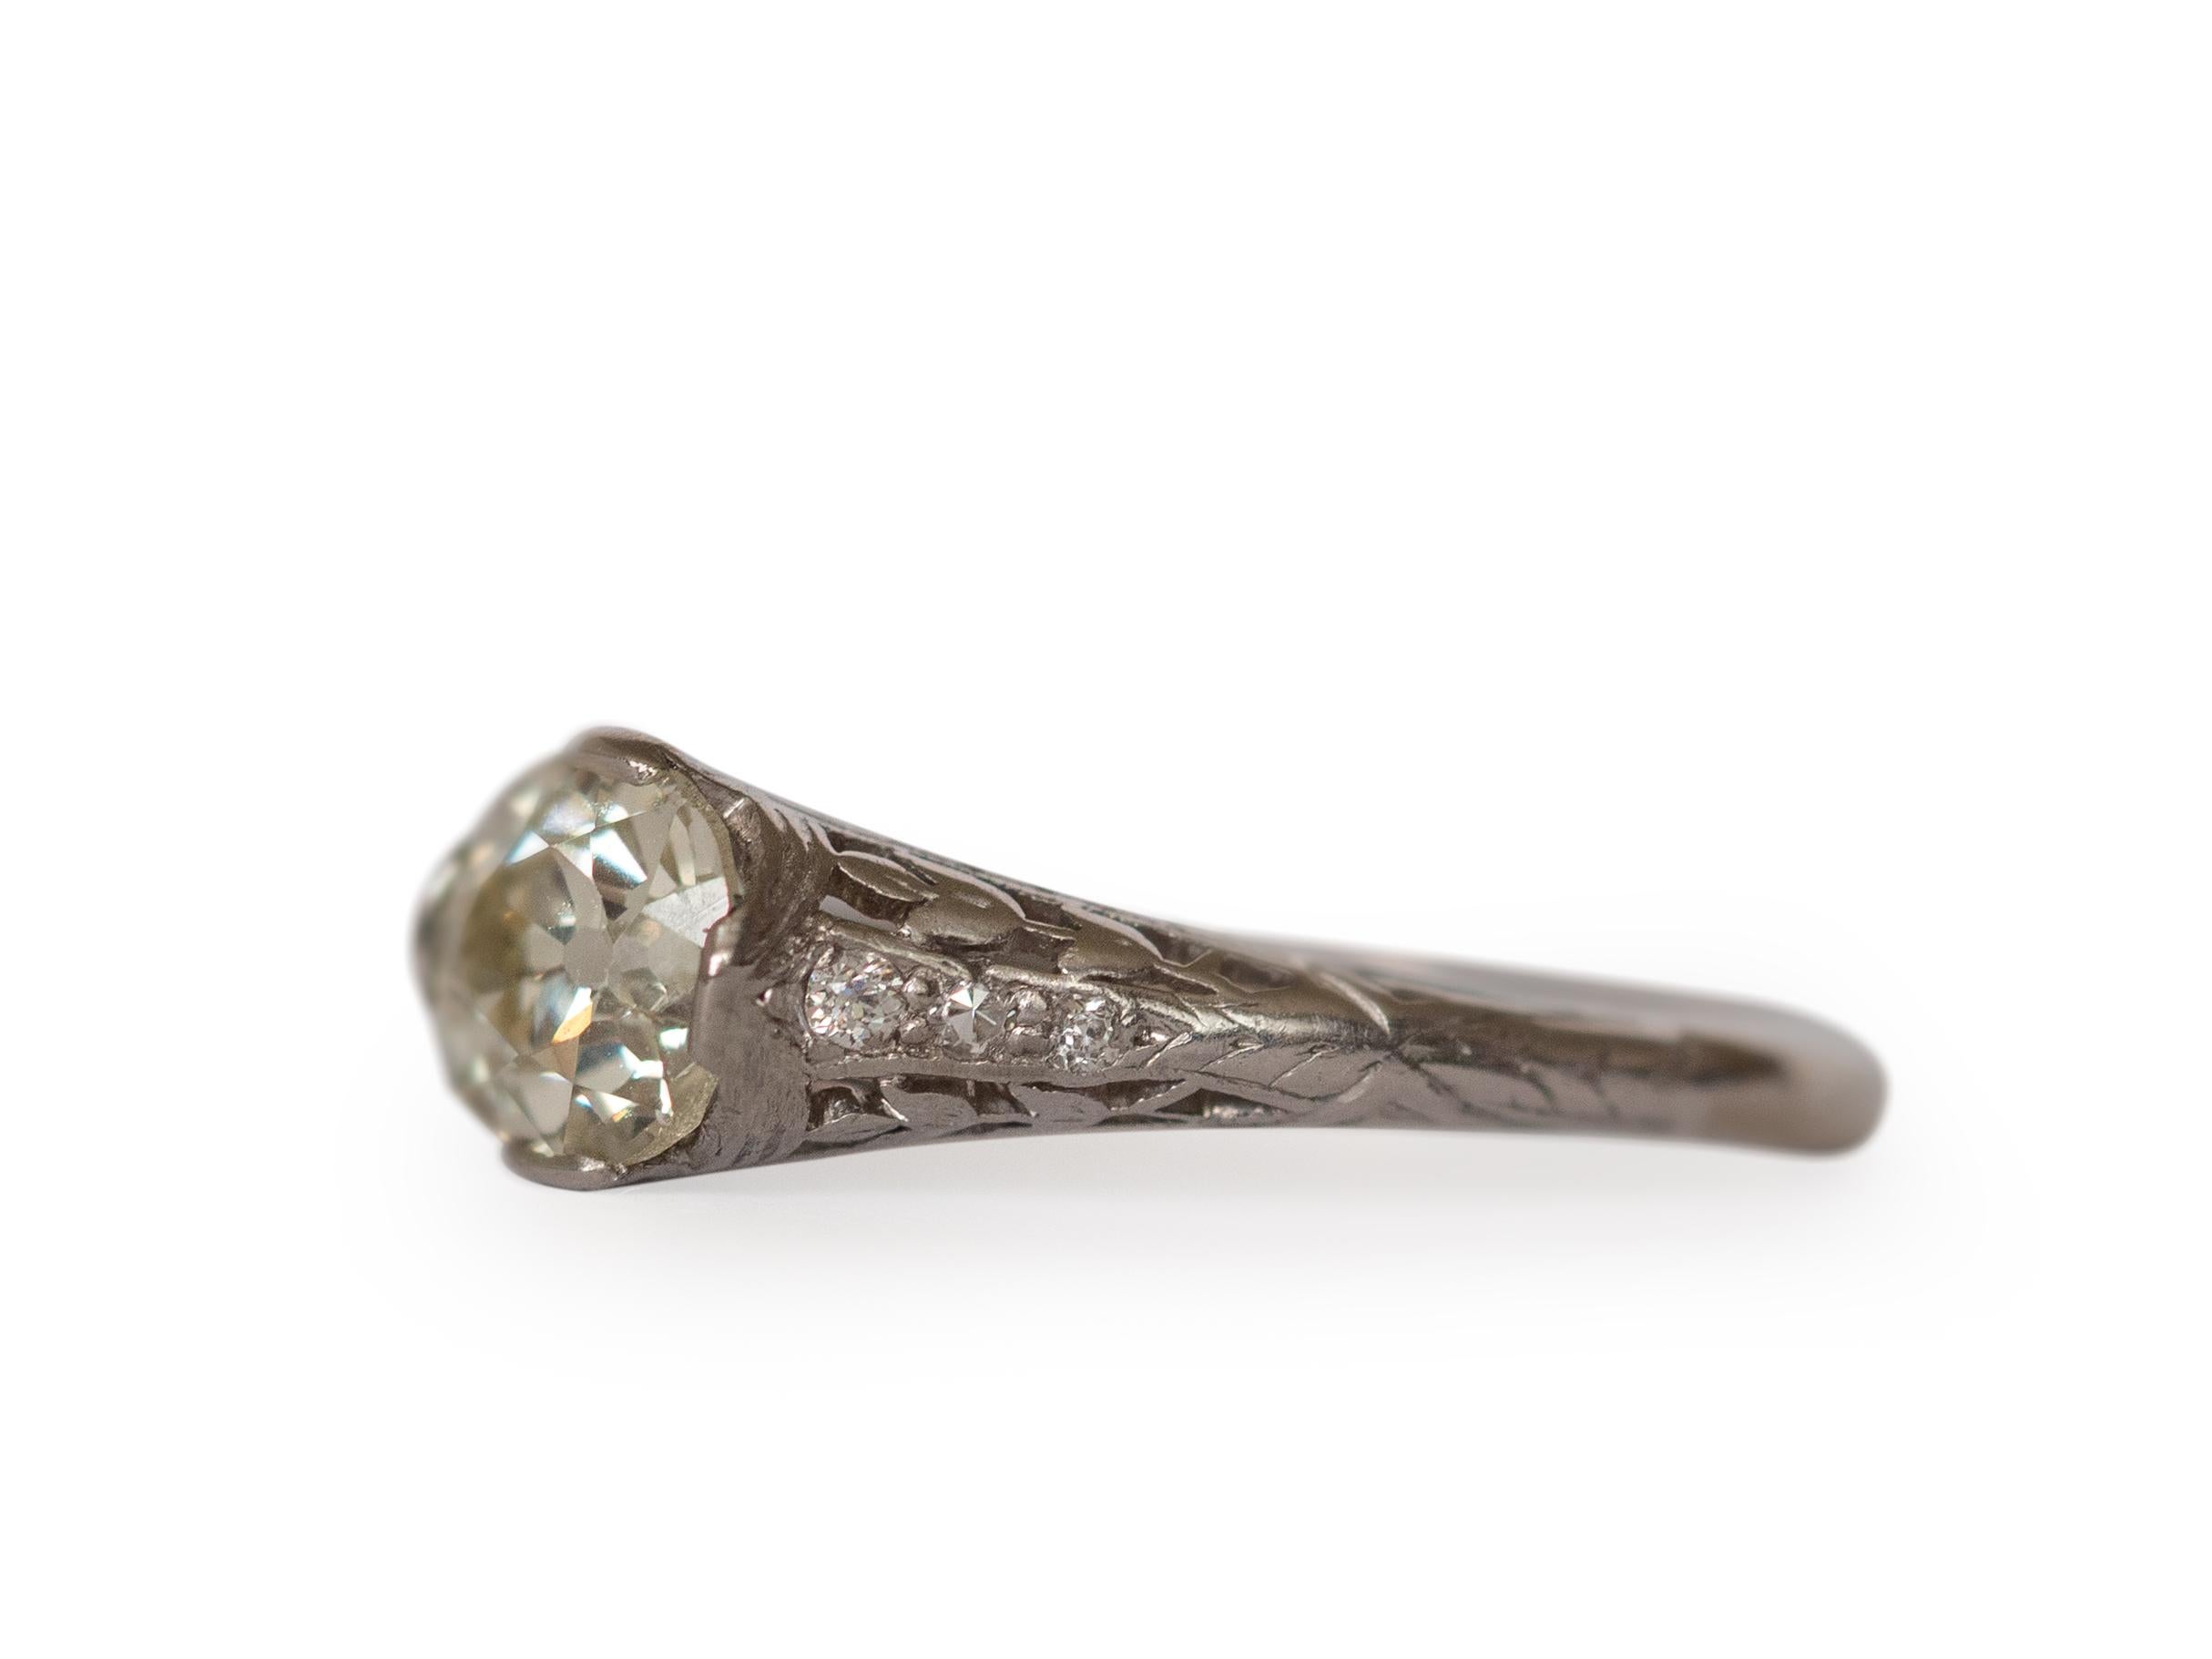 Item Details: 
Ring Size: 6.5
Metal Type: Platinum [Hallmarked, and Tested]
Weight: 3 grams

Center Diamond Details:
Weight: .94 Carat
Cut: Antique Cushion
Color: M-N
Clarity: SI1

Finger to Top of Stone Measurement: mm
Condition: Excellent